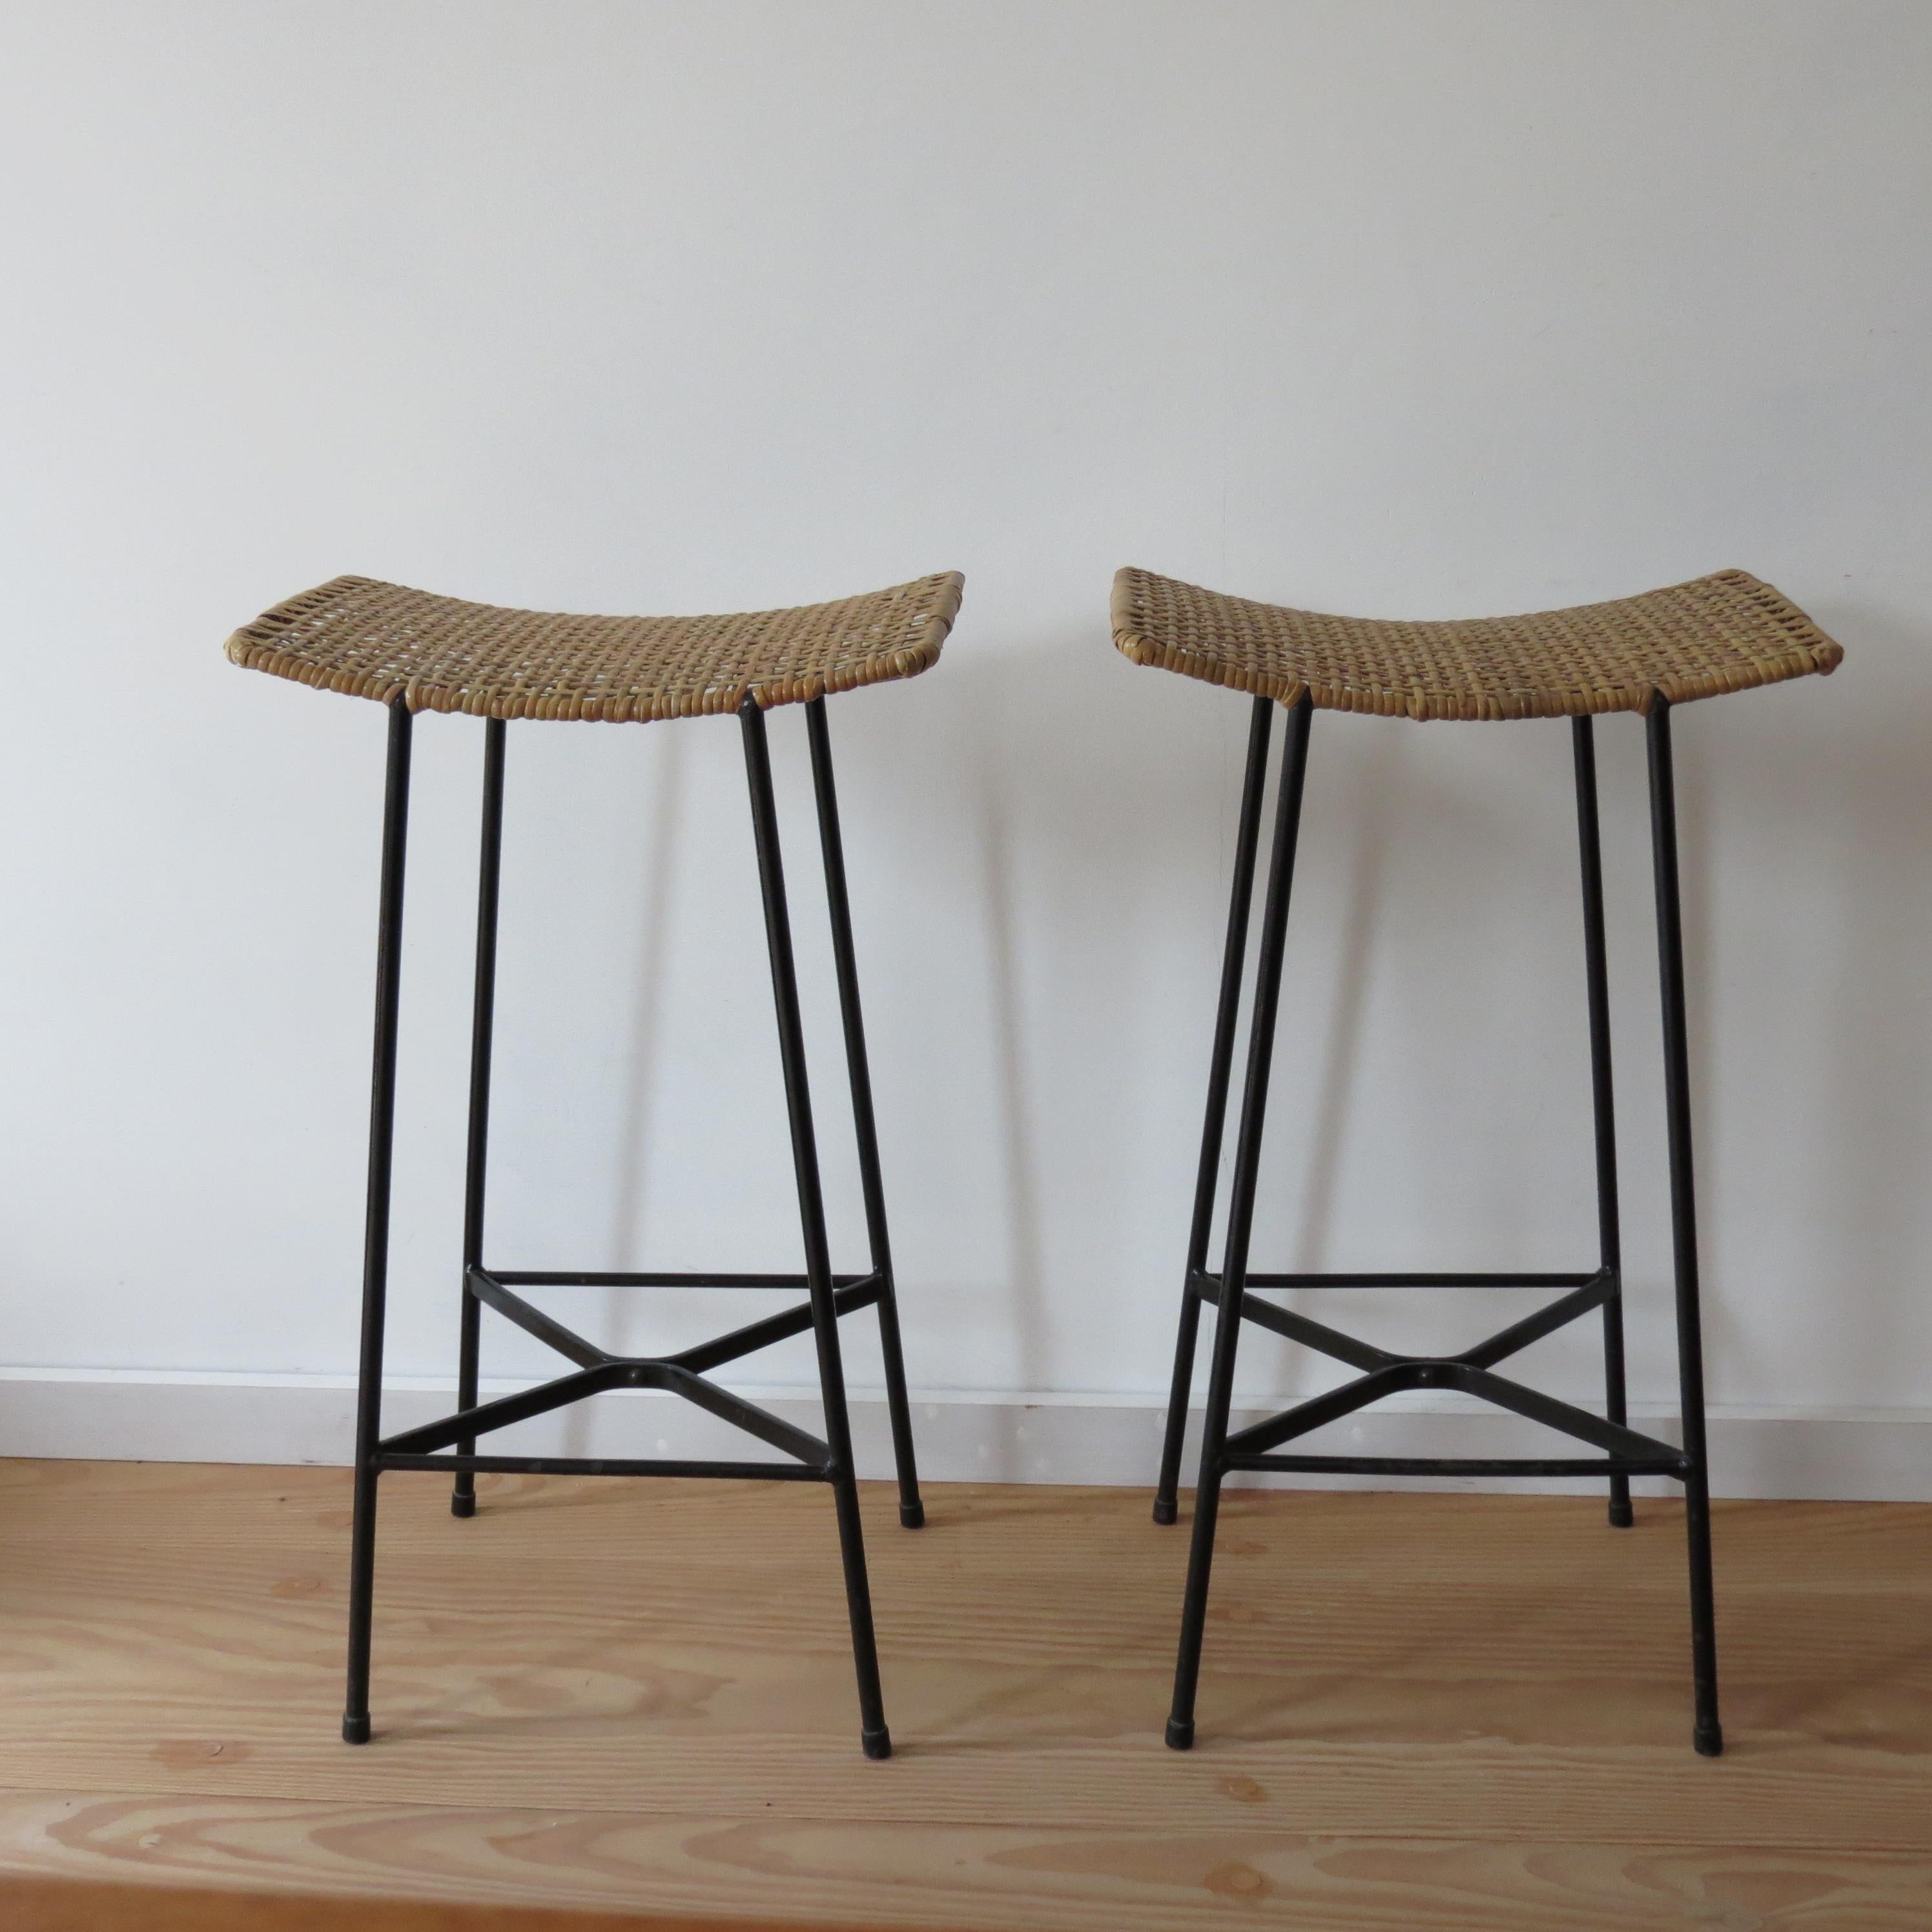 Pair of good quality metal and cane stools. Made from metal with stove enameled paint finish and cane seats. They date from the 1960s and are very good quality. 
Both have new seats and have been newly re-caned. Some loss in areas to the enameled